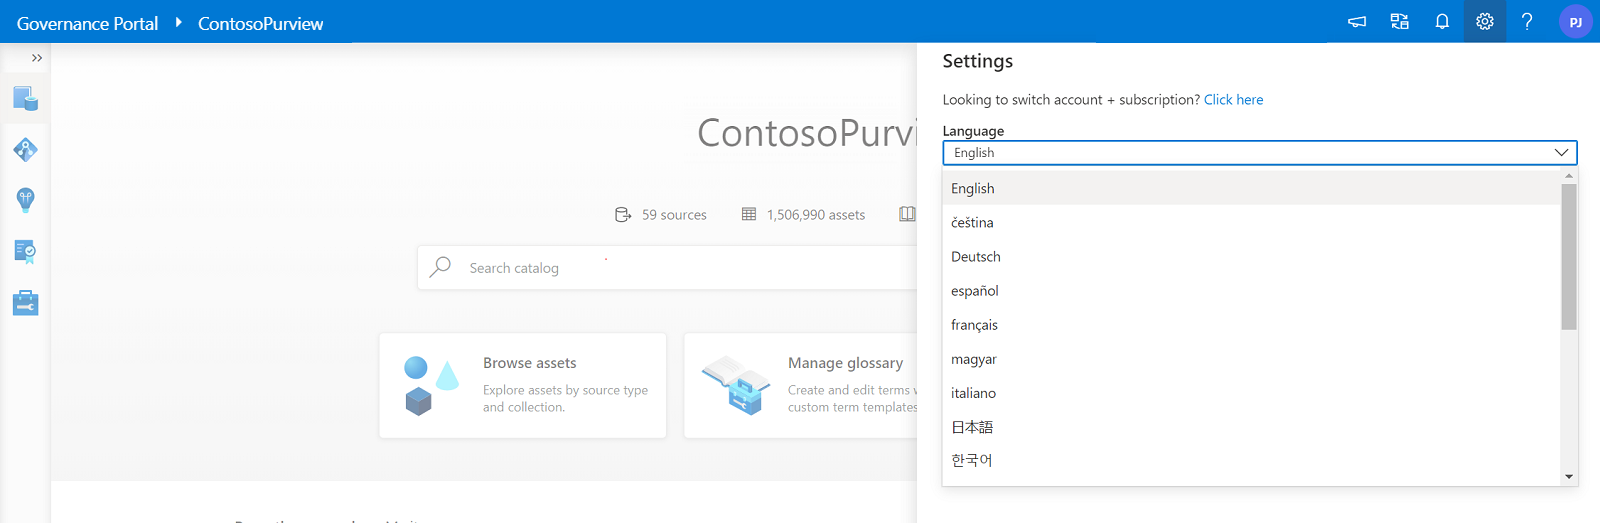 Screenshot of how to localize the Microsoft Purview governance portal.